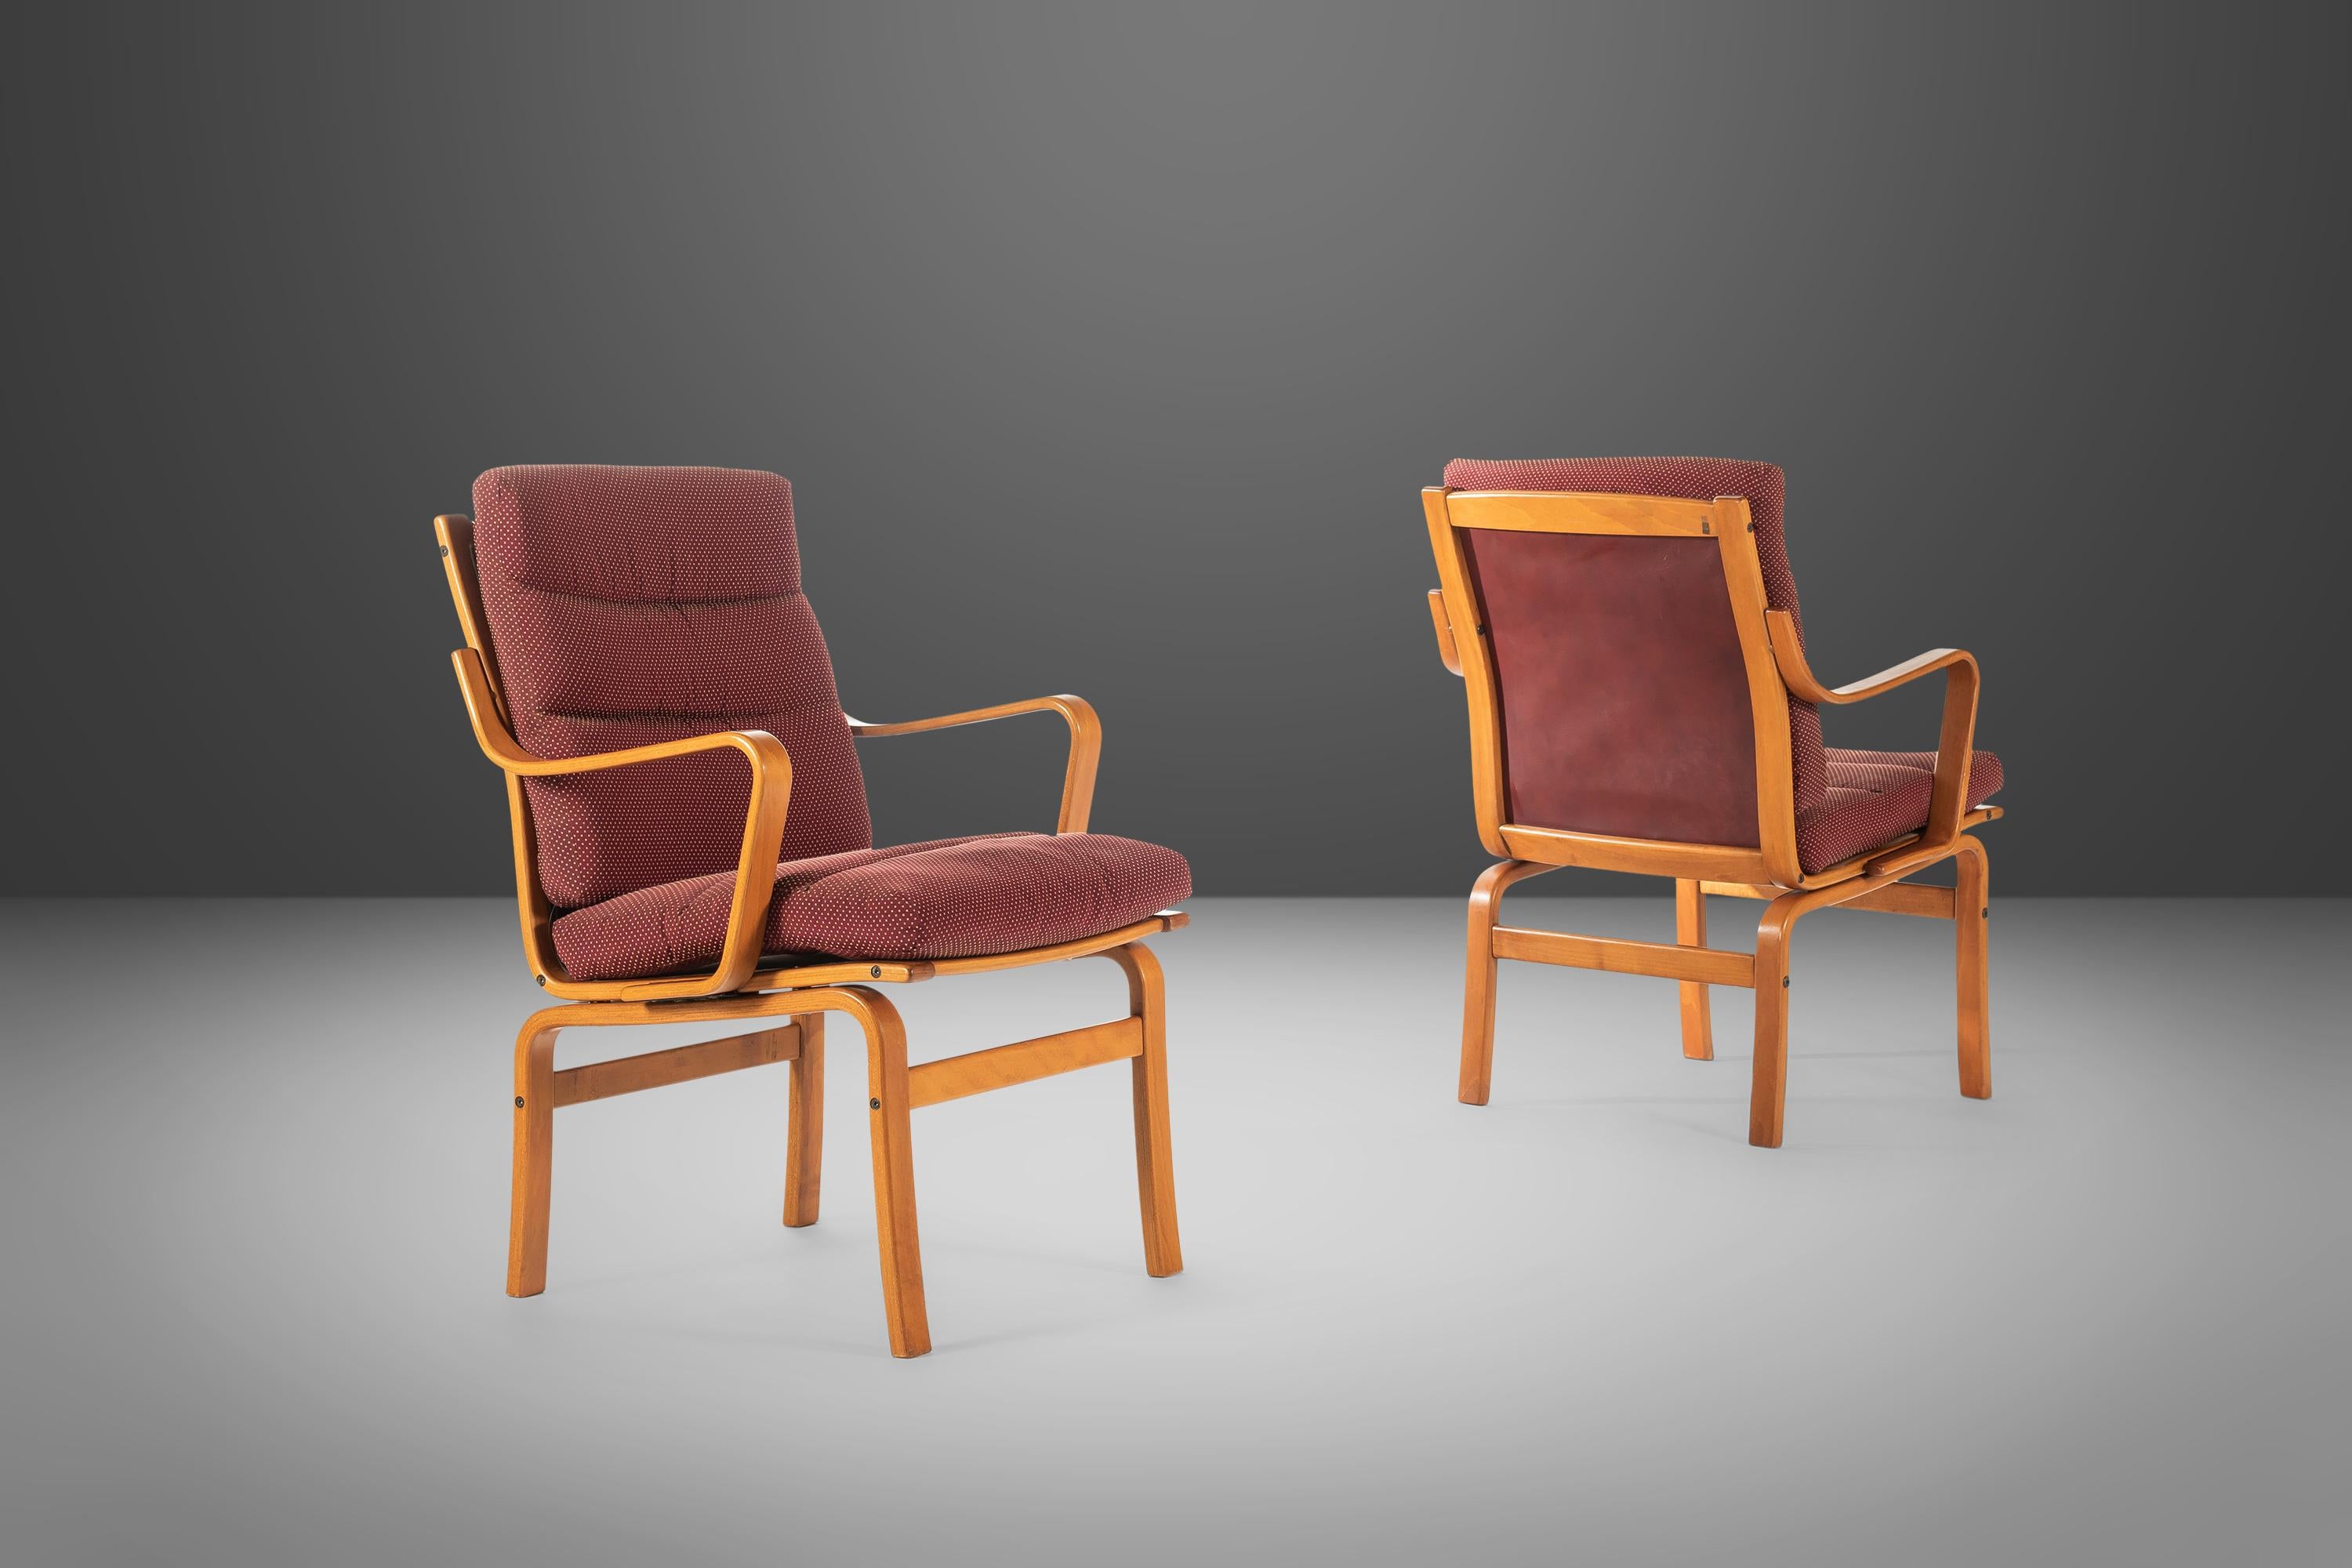 This truly is a fabulous set of Mid Century Modern Swedish Lounge Chairs. The lines on these are stunning. I honestly can't describe how comfortable this set of chairs is which makes it a perfect addition to any home or